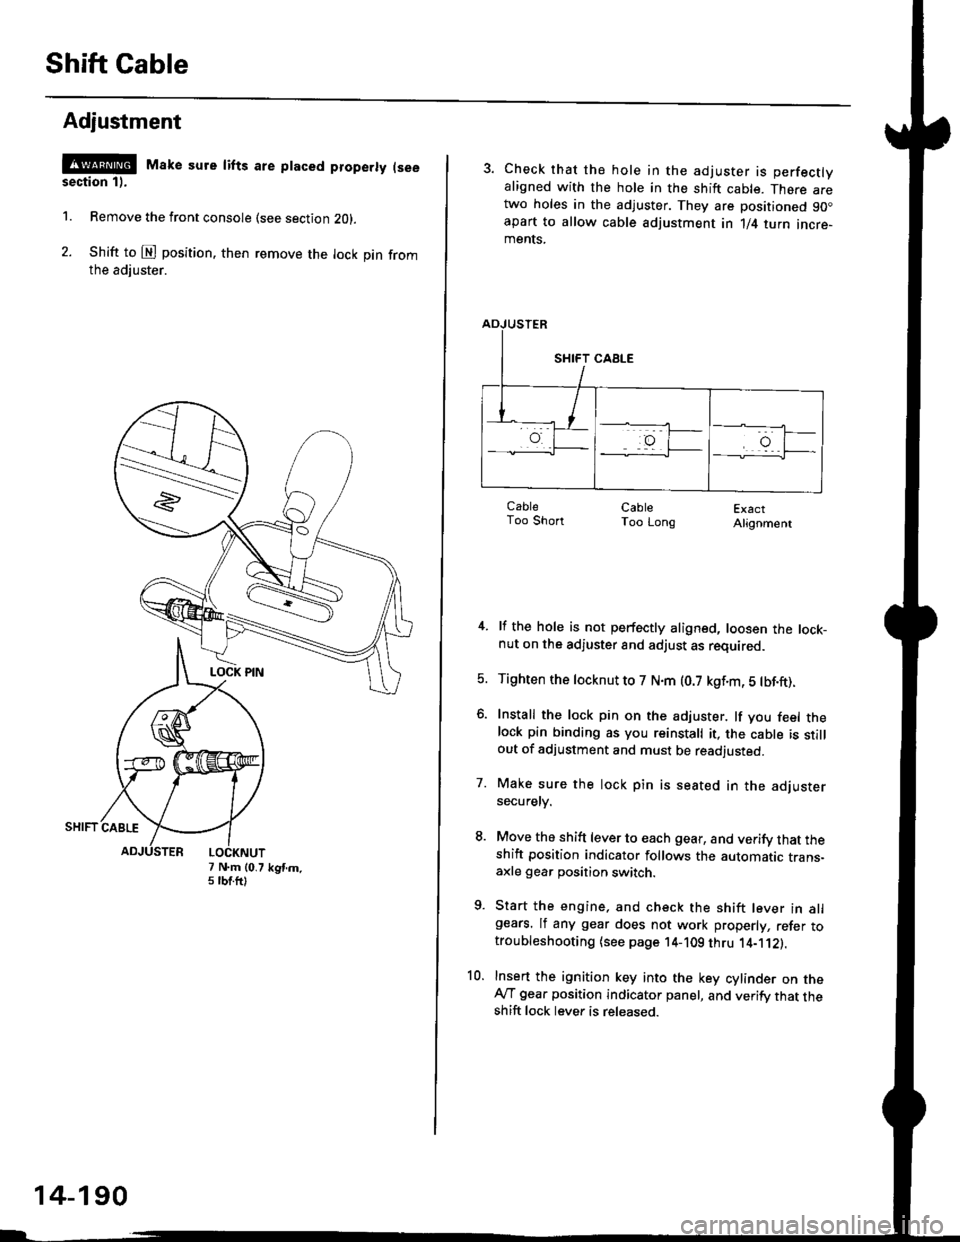 HONDA CIVIC 1998 6.G Workshop Manual Shift Cable
Adjustment
@ Make sure lifts are ptaced properly (see
section 1).
1. Remove the front console (see section Z0l.
2. Shift to @ position. then remove the lock pin fromthe adiuster.
7 N.m (0.